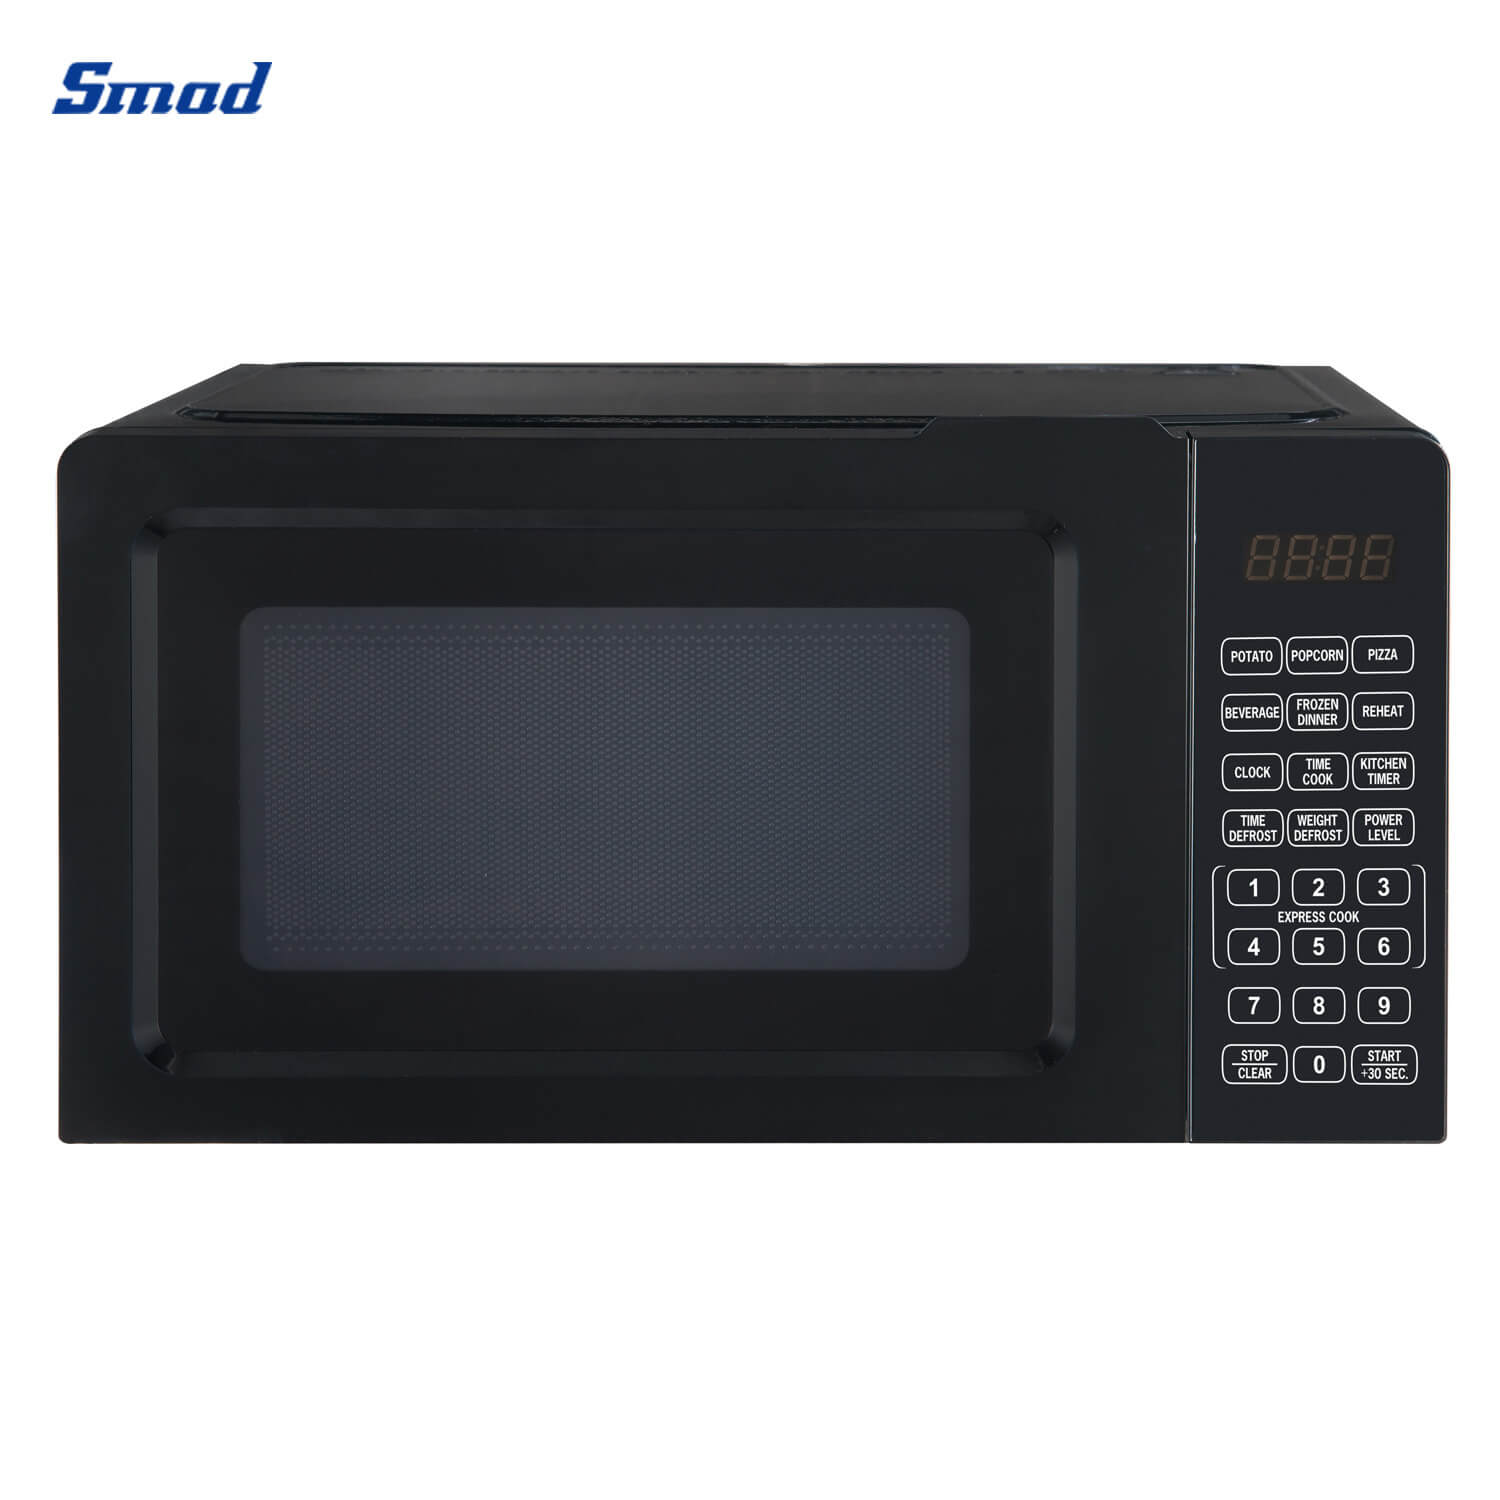 
Smad Digital Microwave Oven with 6 Auto Cooking Menus